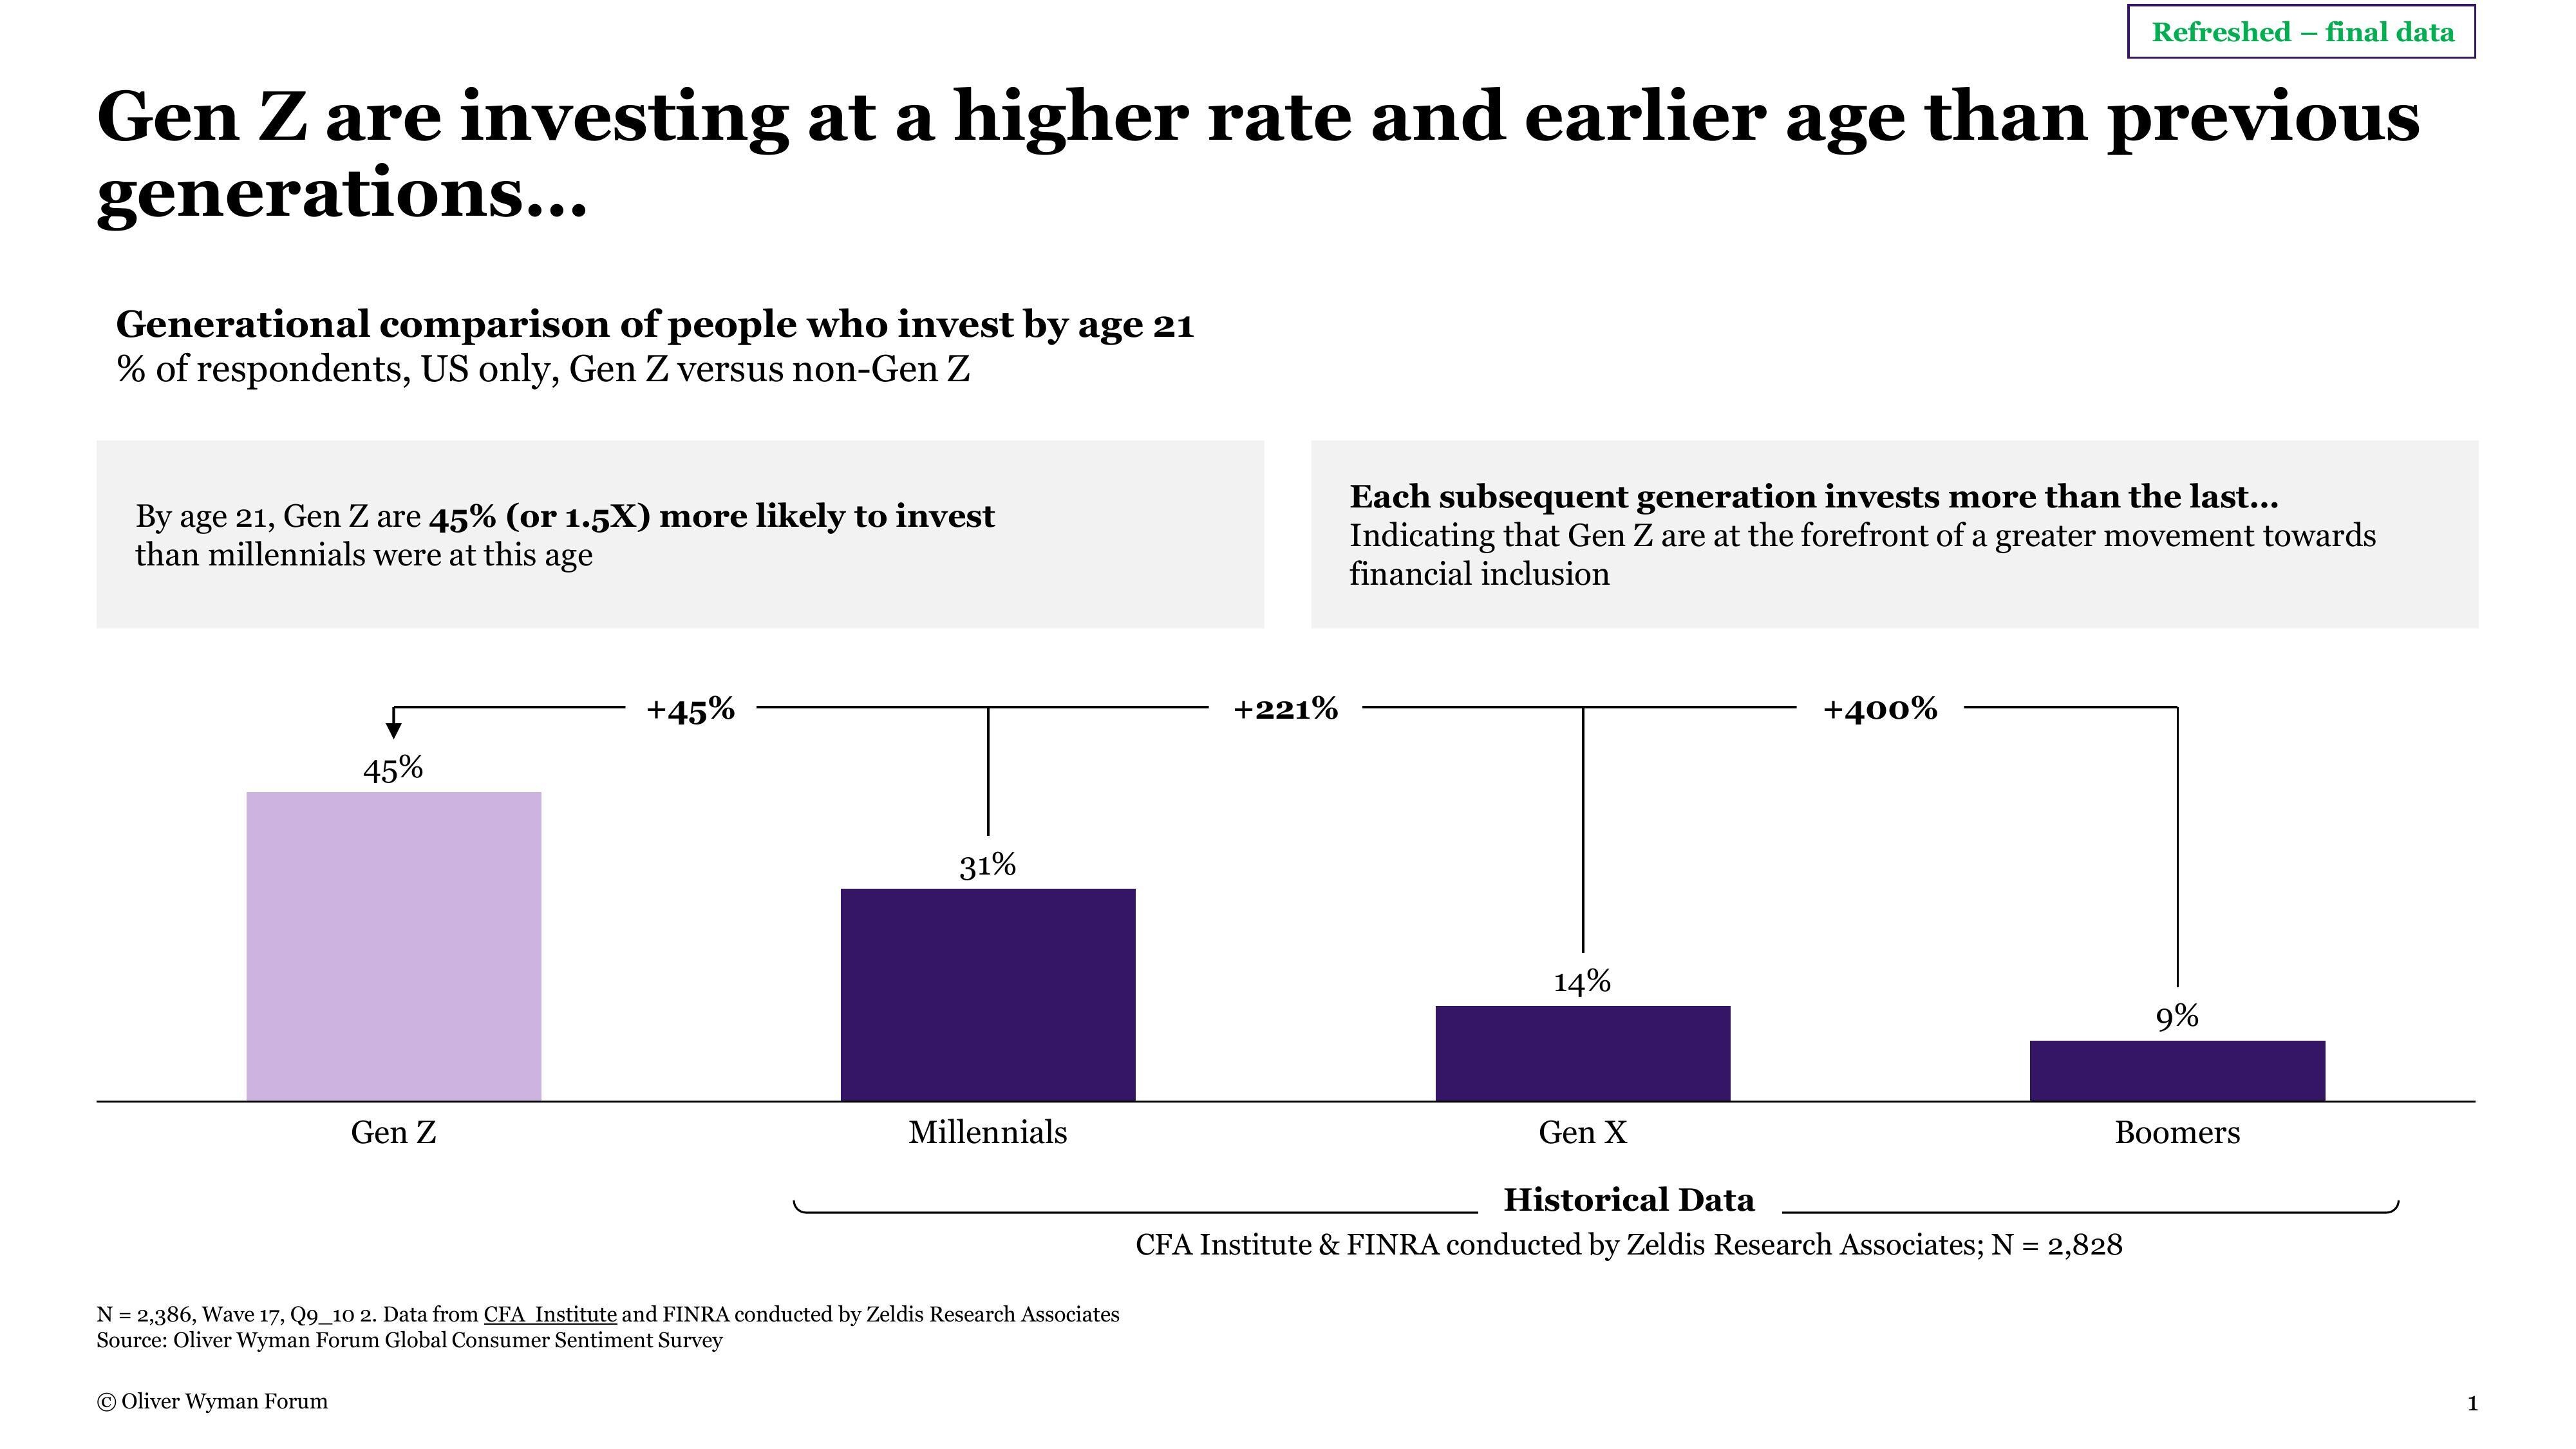 Gen Zers are 45% more likely to start investing by age 21 than Millennials were.